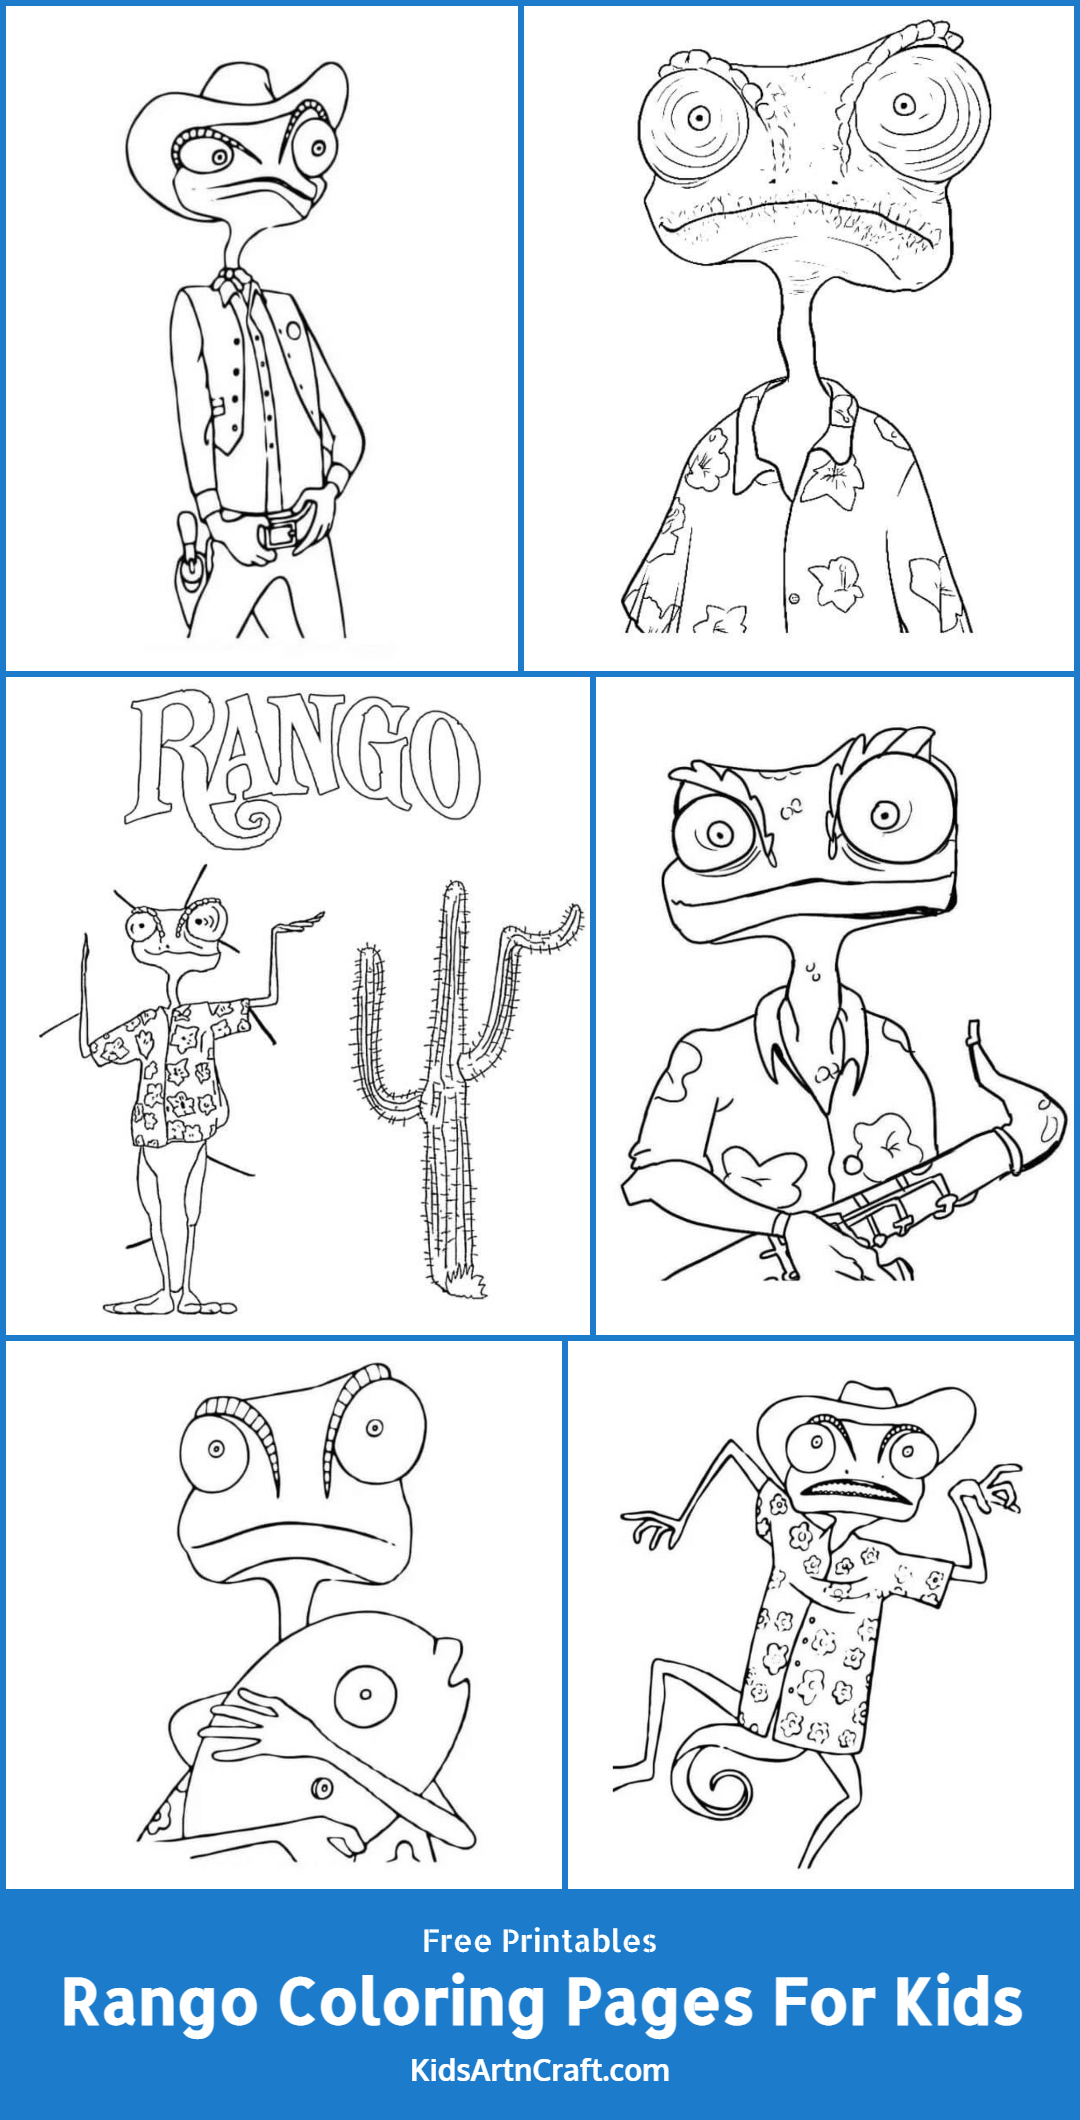 Rango Coloring Pages For Kids – Free Printables